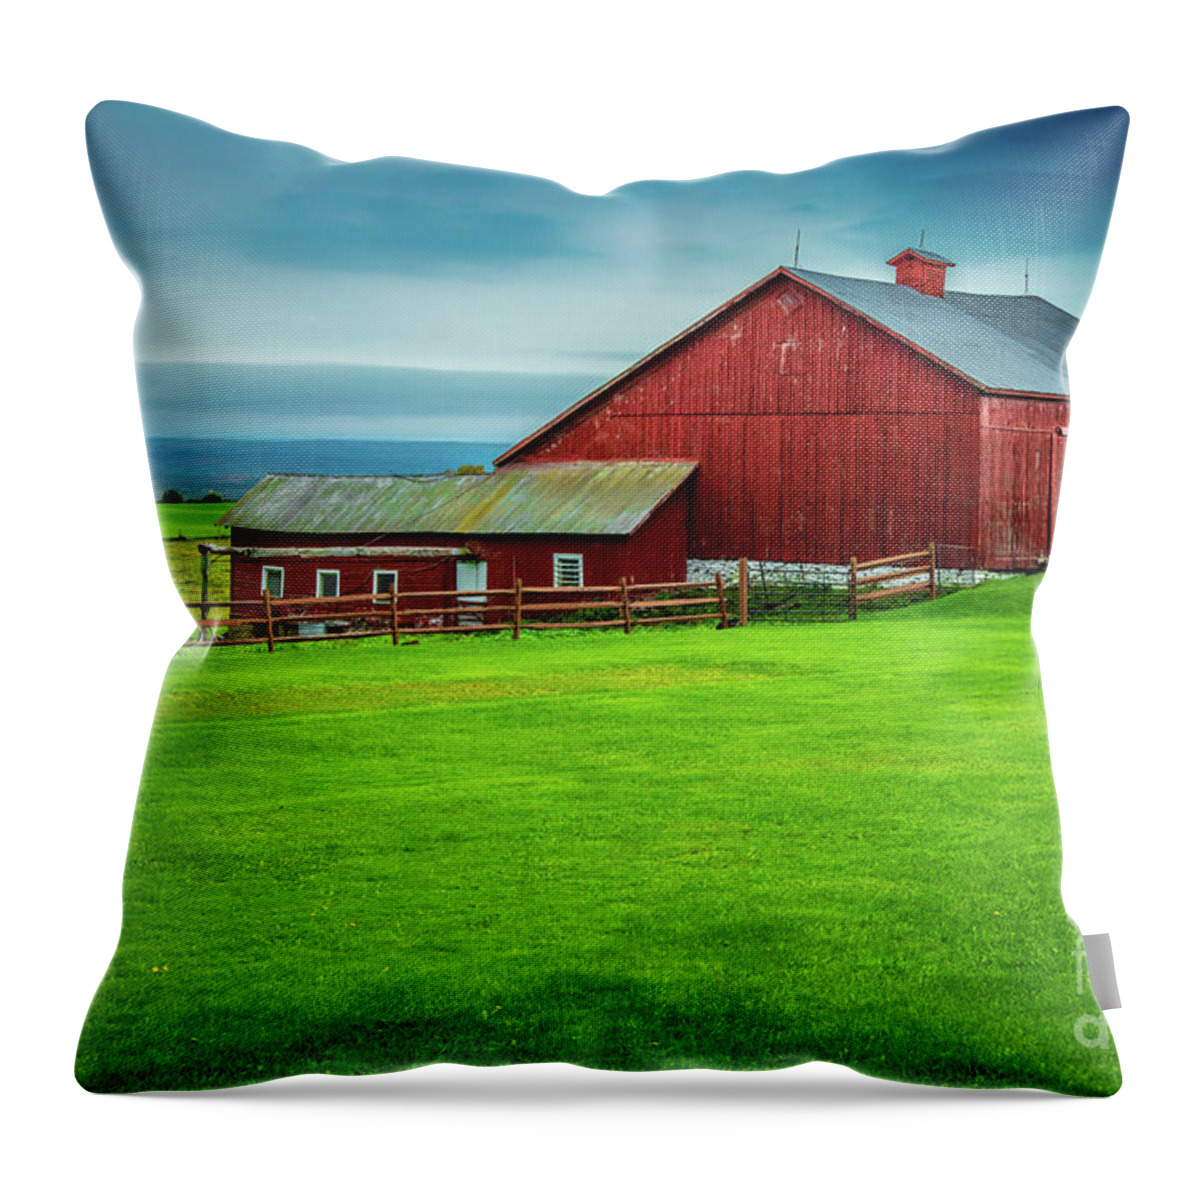 Rgb Throw Pillow featuring the photograph Tug Hill Farm by Roger Monahan